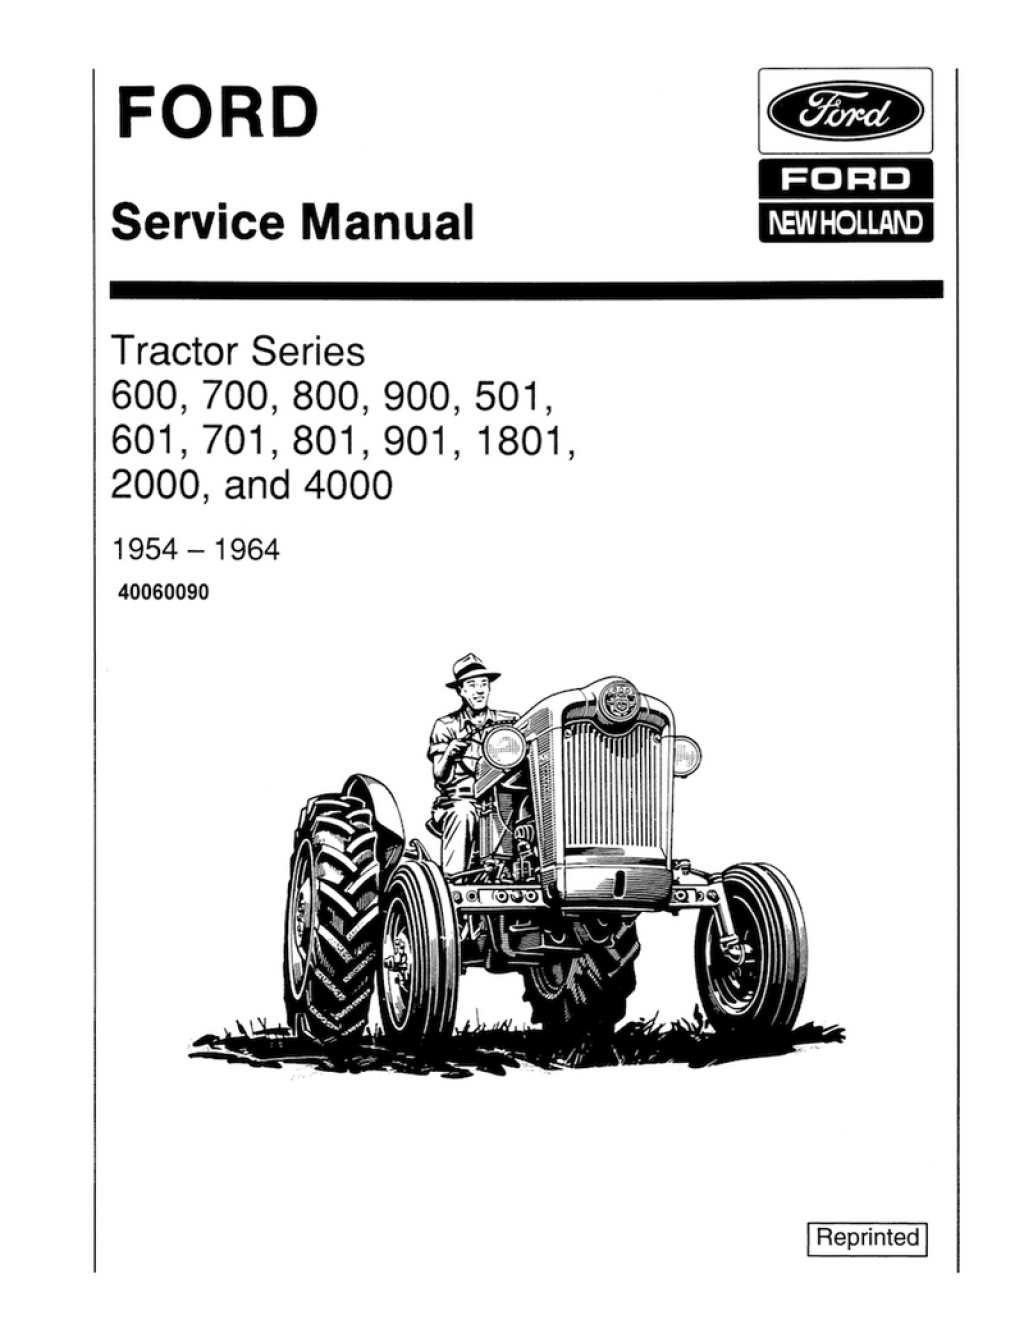 Picture of: Ford , , , , , , , , , , , , , ,  , , 1, , , , and  Tractor – Service Manual